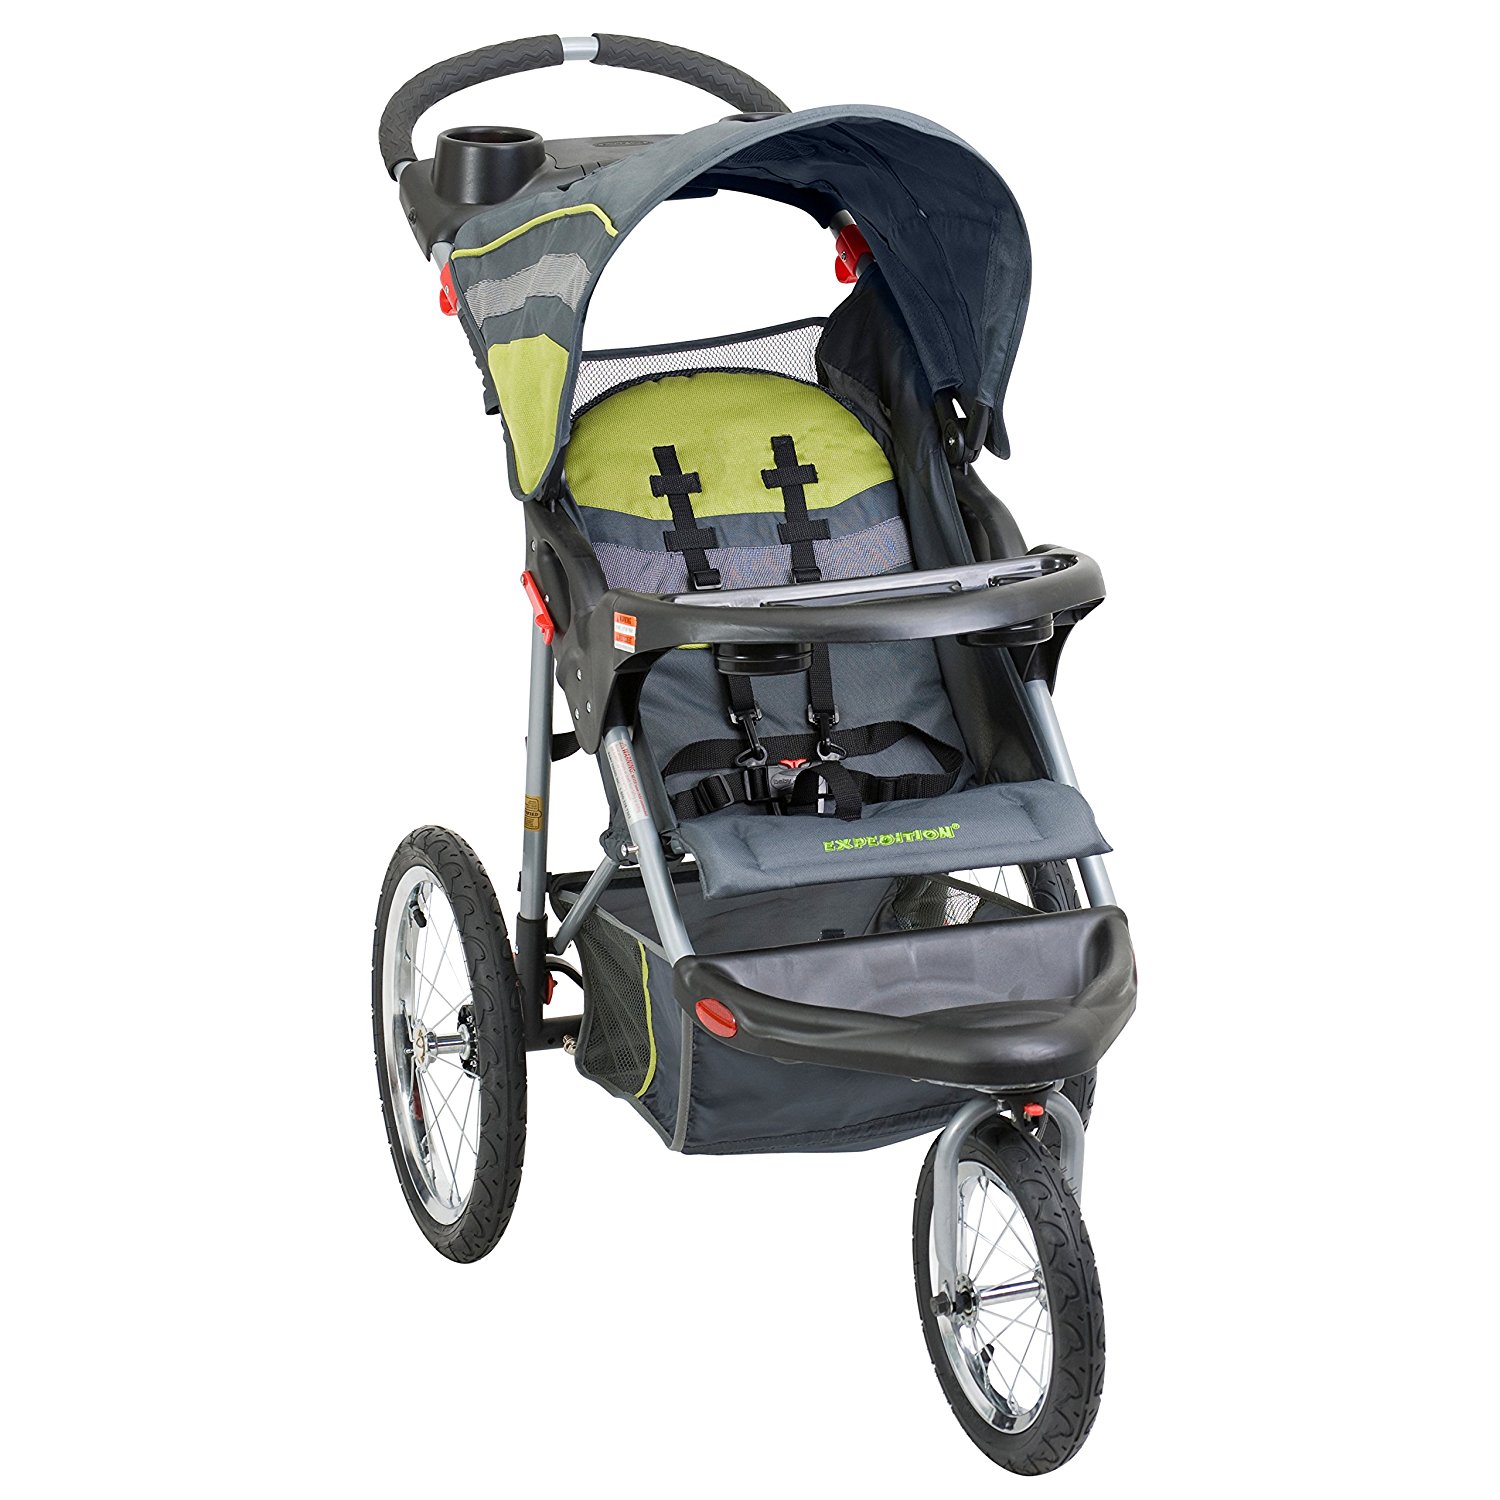 how to use baby trend stroller